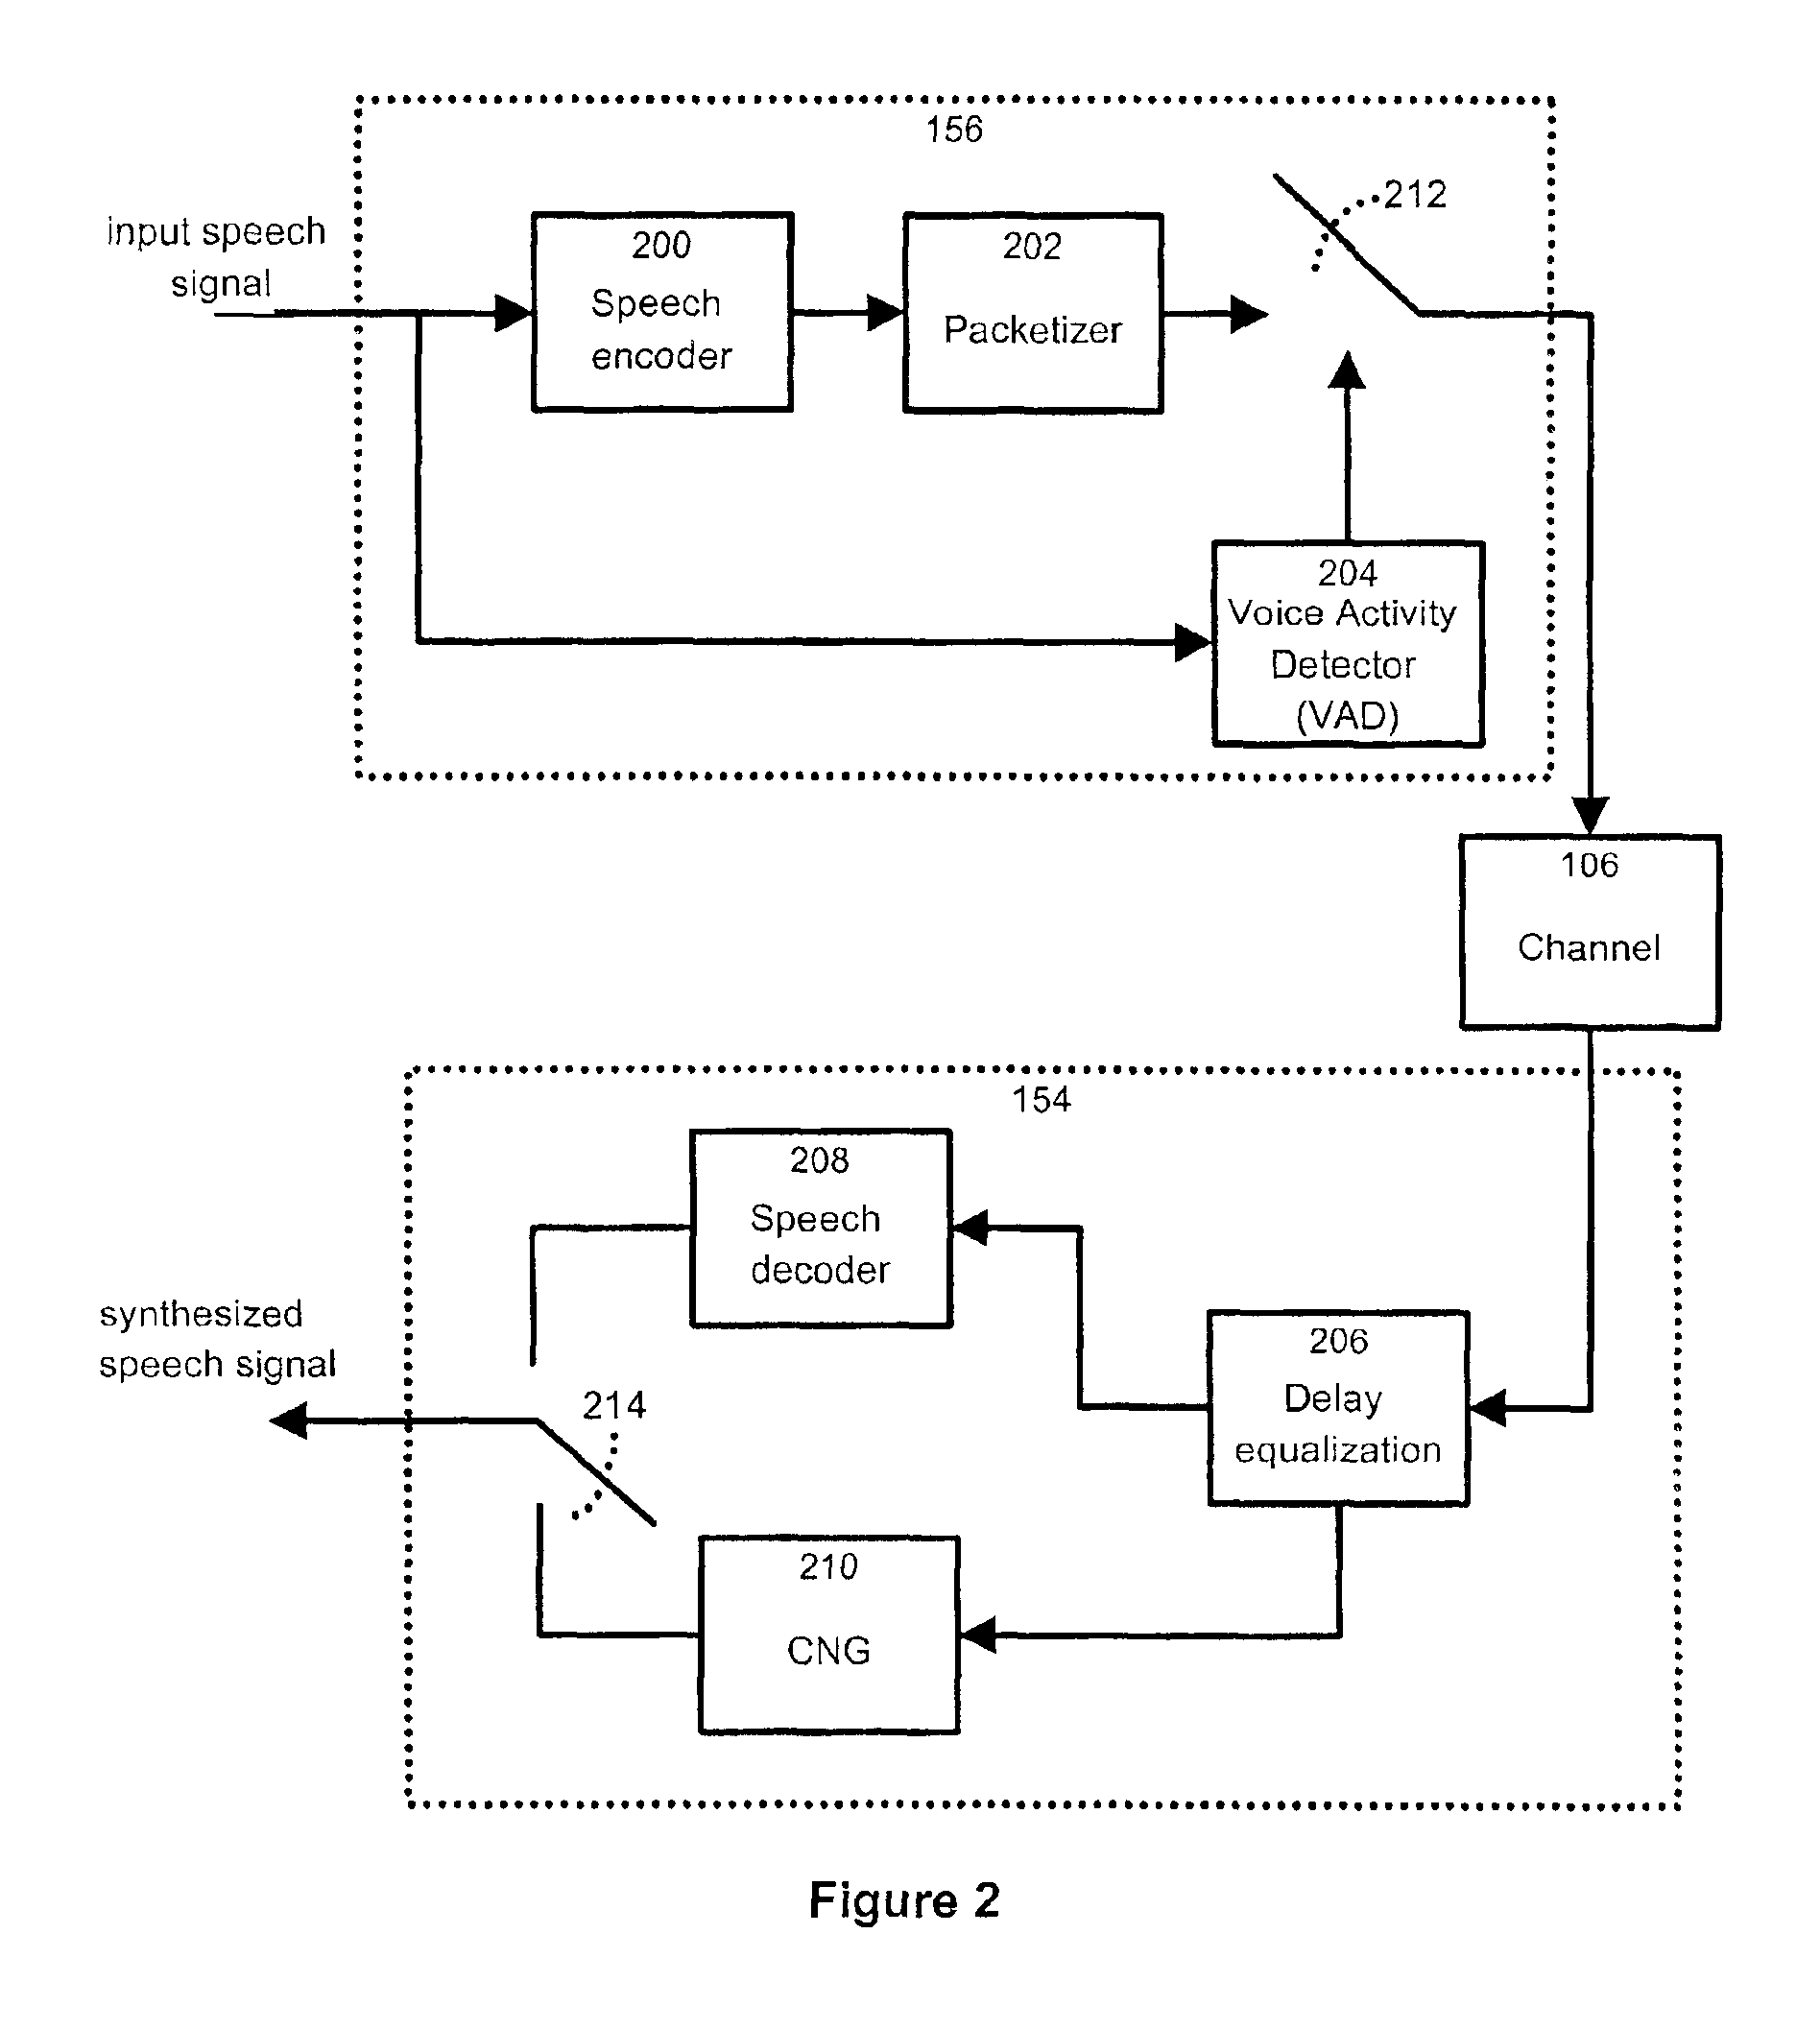 Method and apparatus for improved voice activity detection in a packet voice network